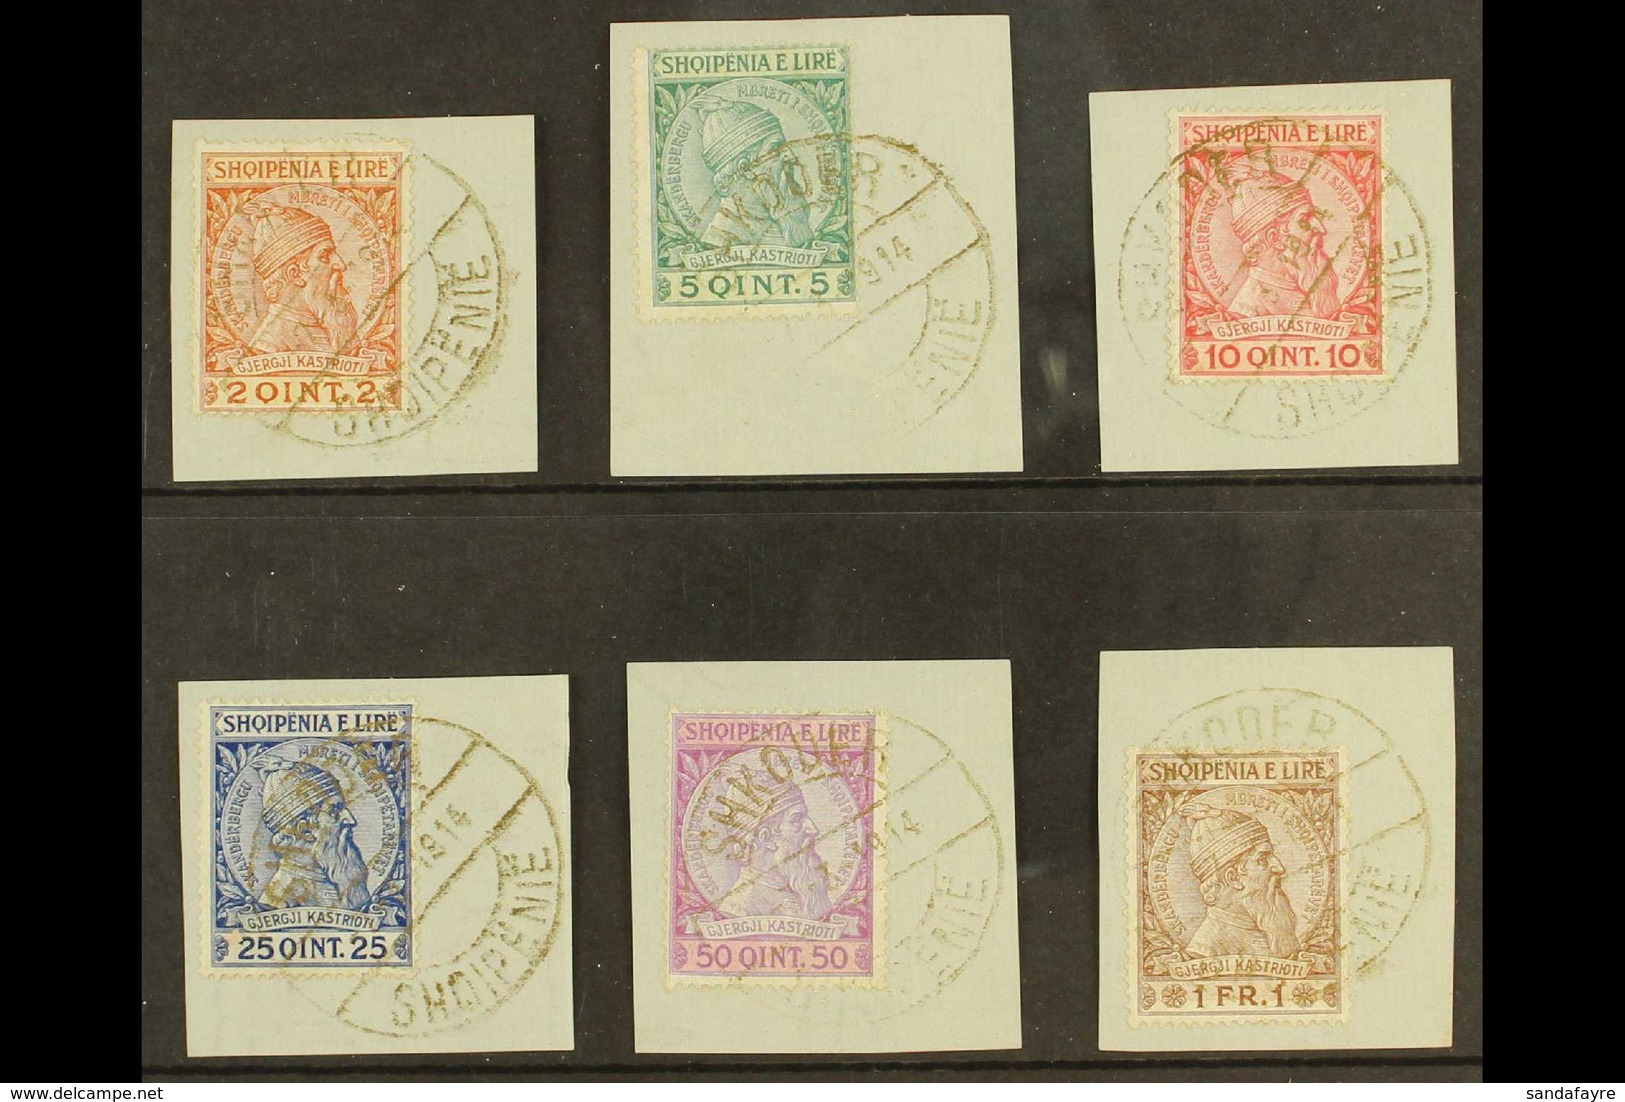 1913  Skanderbeg Complete Set Of Six, Mi 29/34, With Each Value On A Separate Piece Cancelled By "SHKODER / SHQIPENIE /  - Albanien